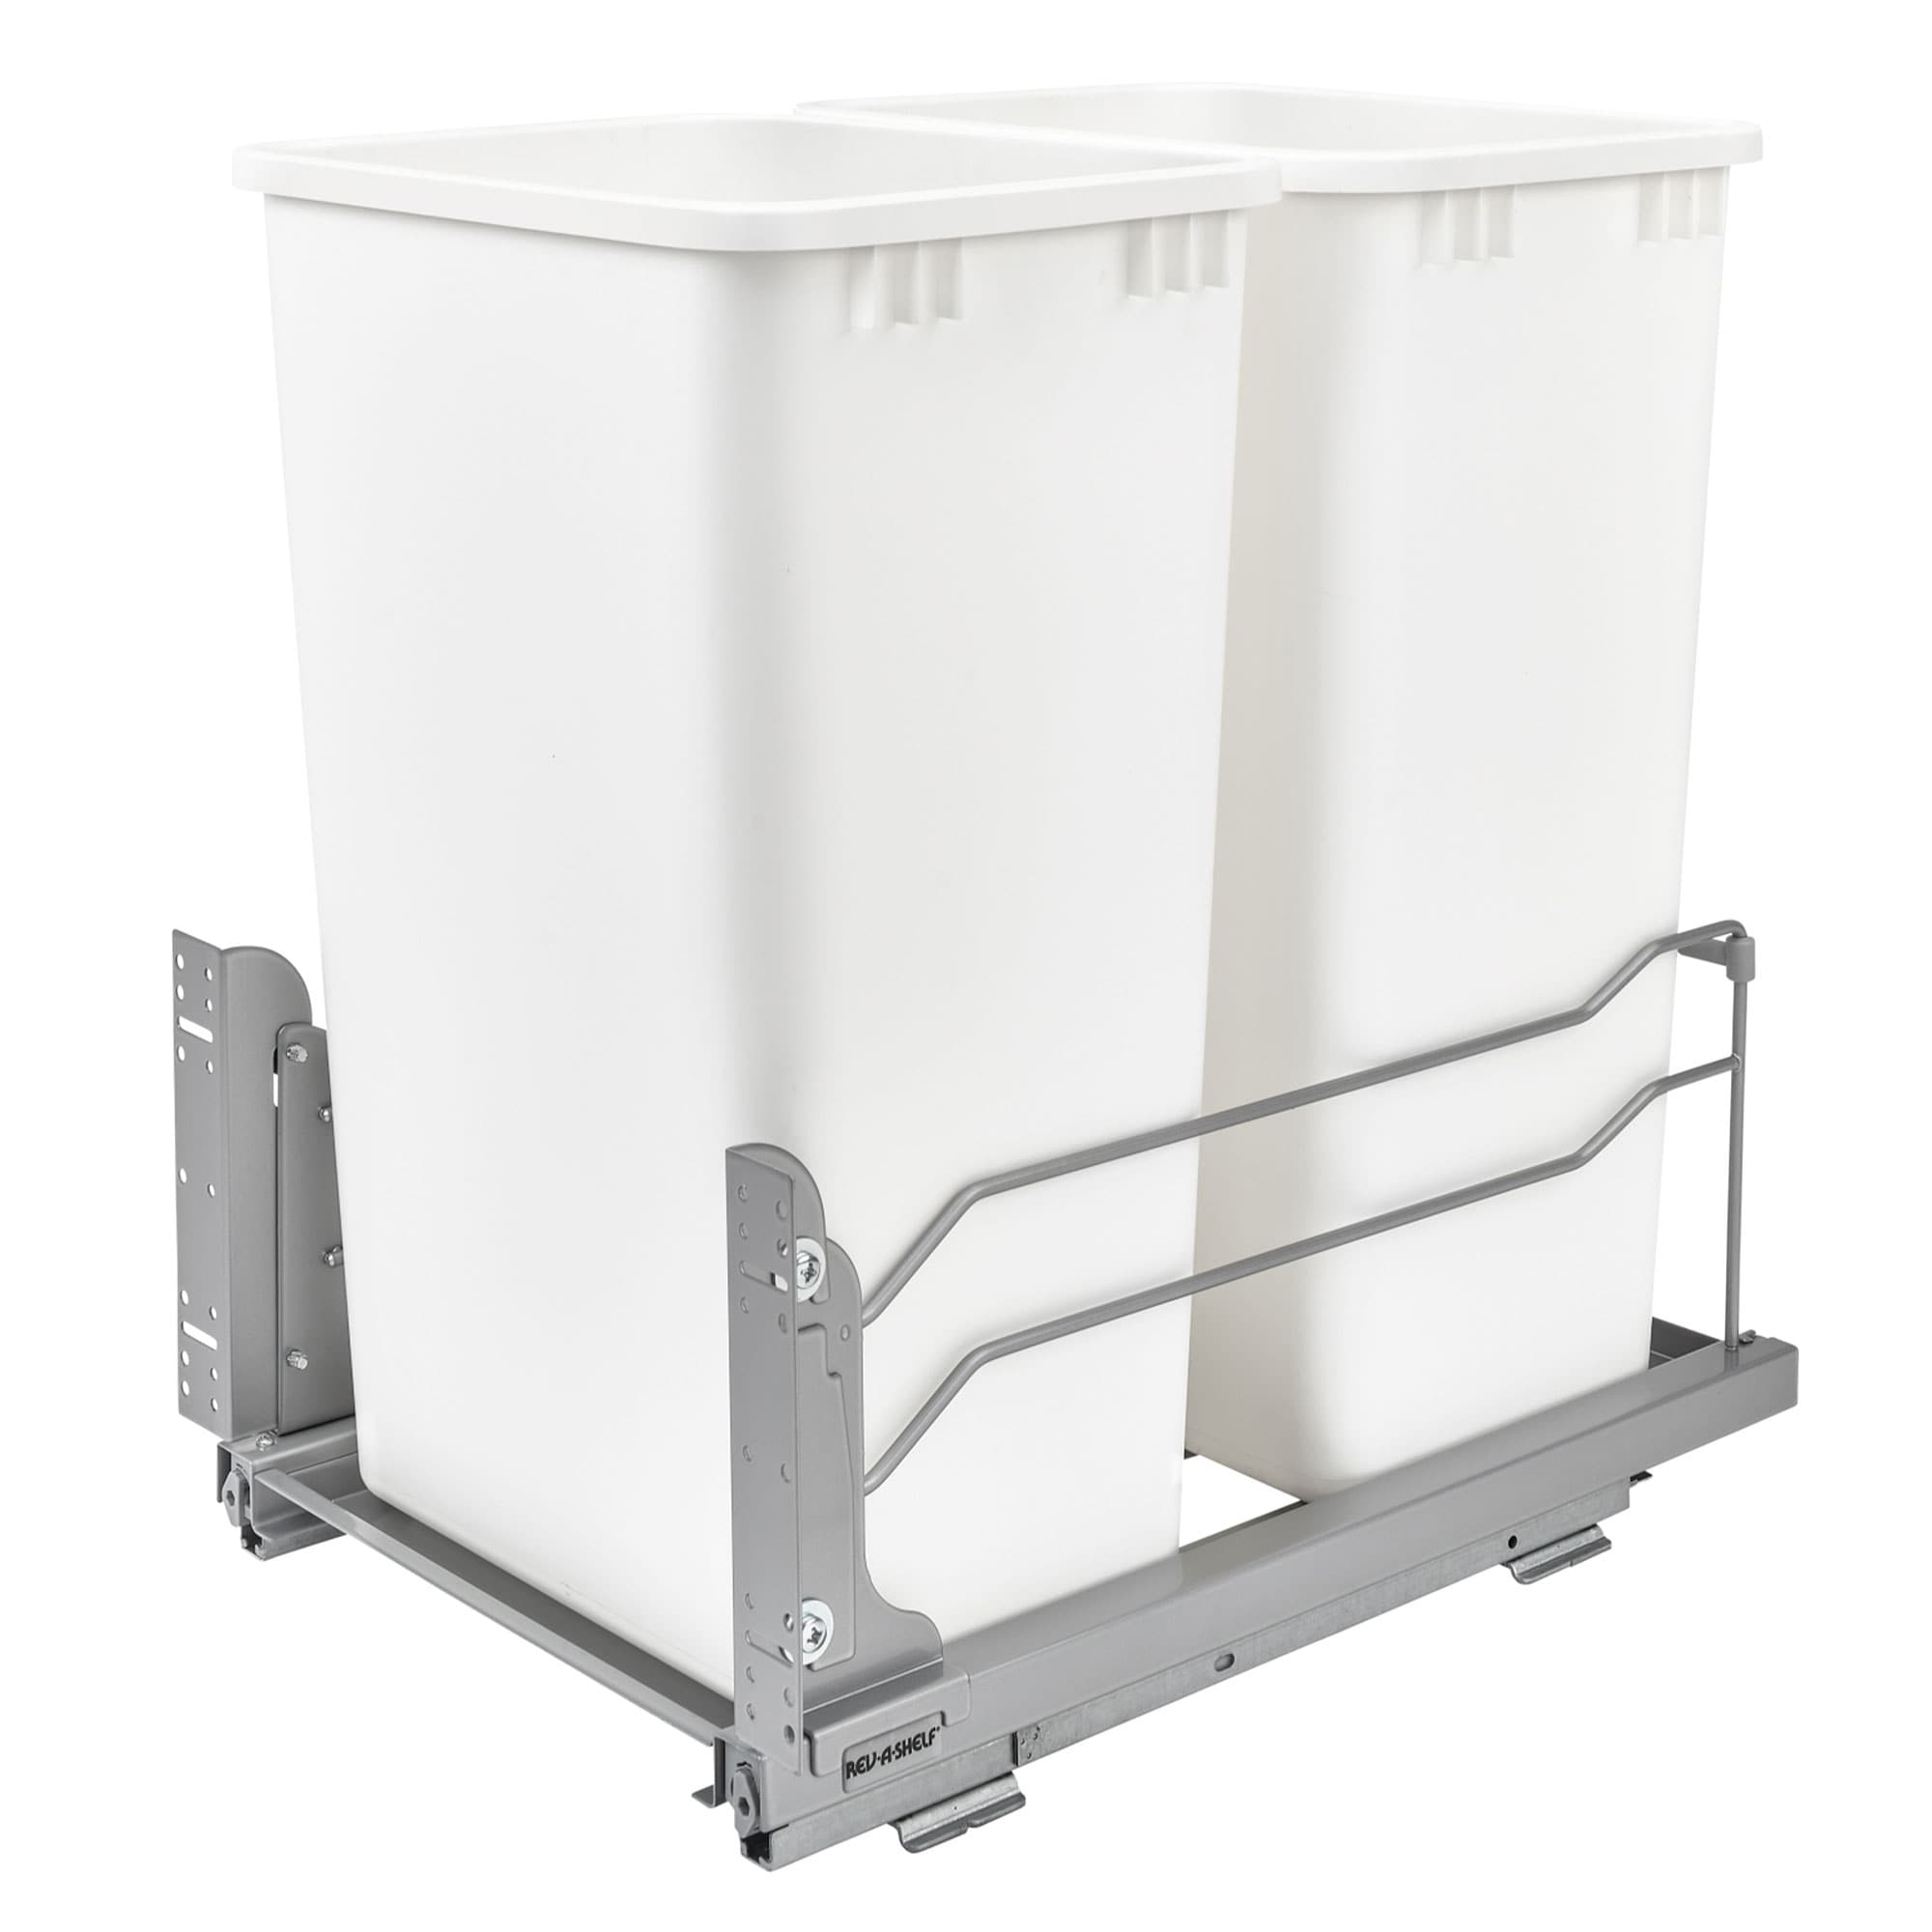 https://ak1.ostkcdn.com/images/products/is/images/direct/5c4f2334971aeaa7aced8dd561d4af673d72f75d/Rev-A-Shelf-Double-Pull-Out-Trash-Can-50-Qt-with-Soft-Close%2C-53WC-2150SCDM-211.jpg